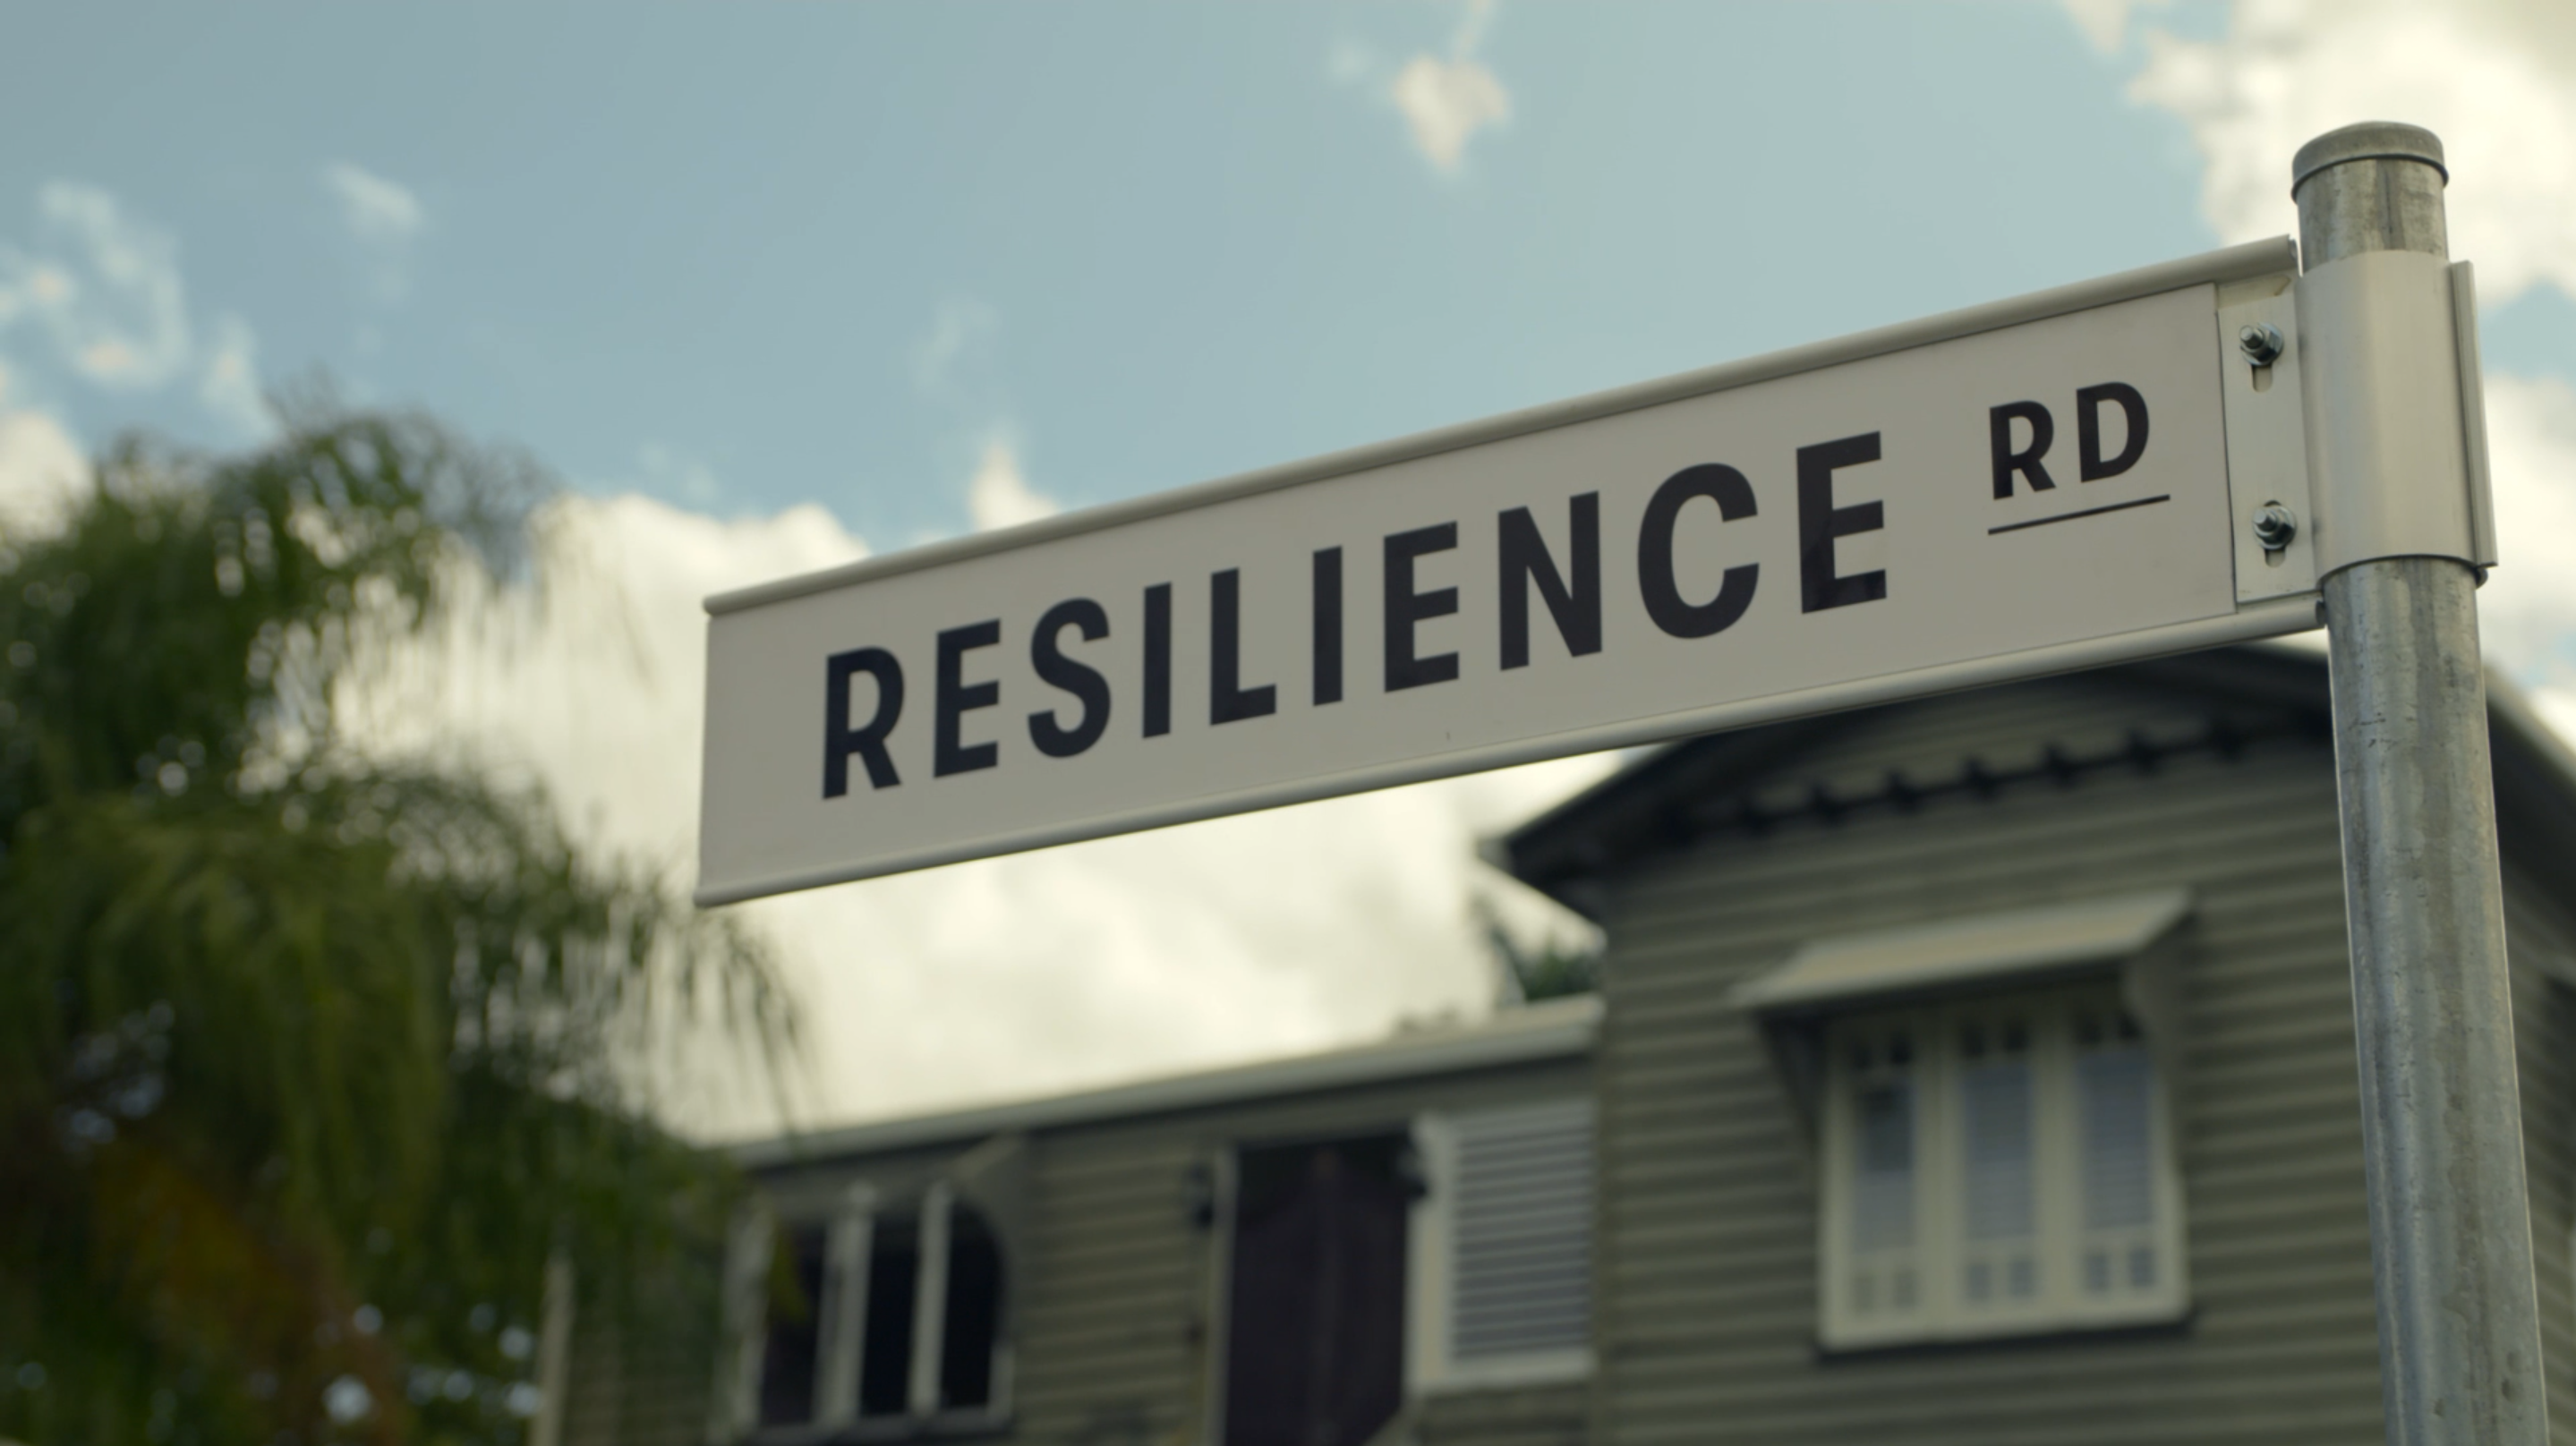 Resilience Rd Street sign